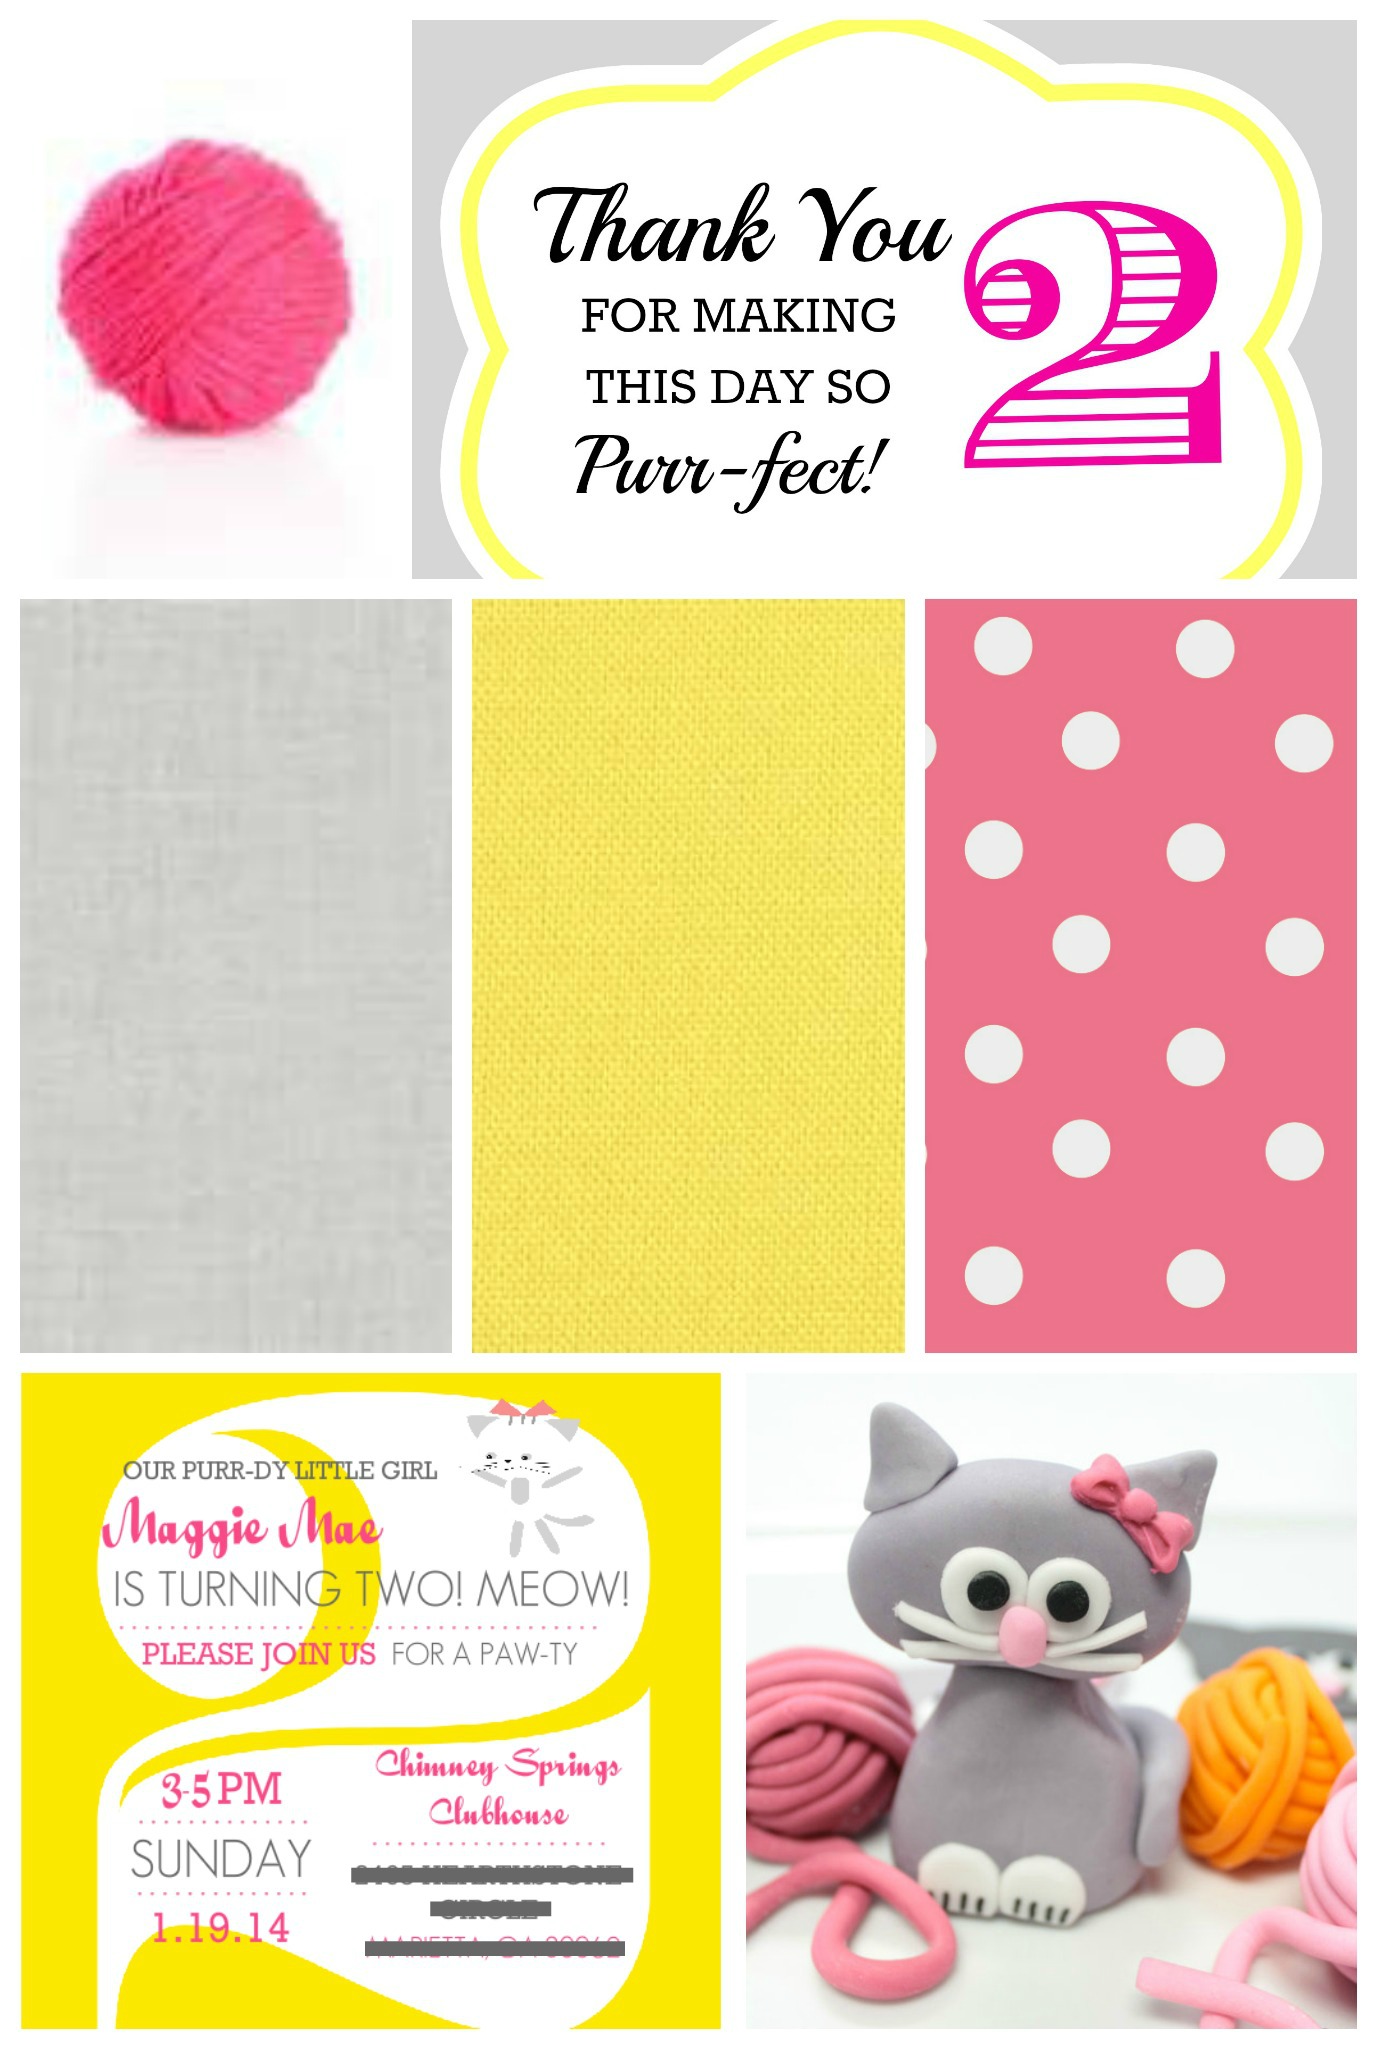 Kitty Cat Birthday Party - Partyspiration Board PartiesforPennies.com